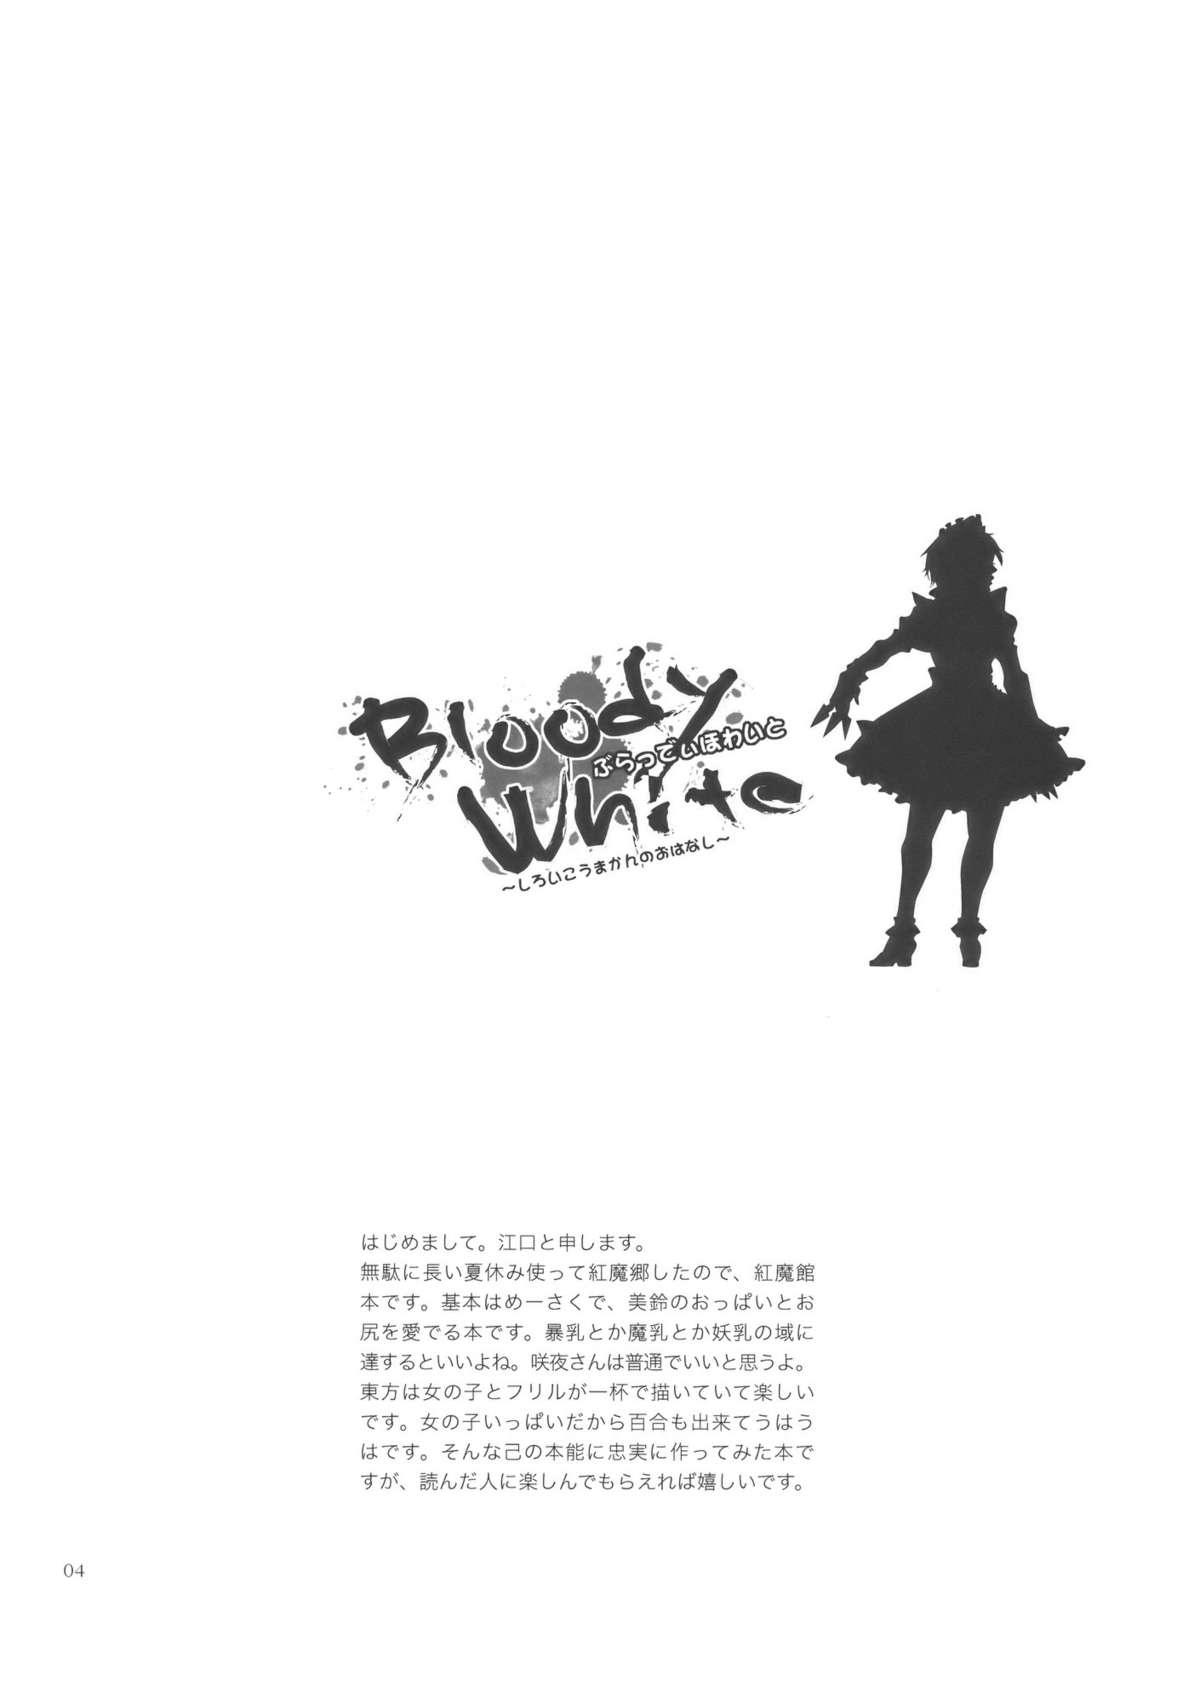 Puto Bloody White - Touhou project Stripping - Page 4